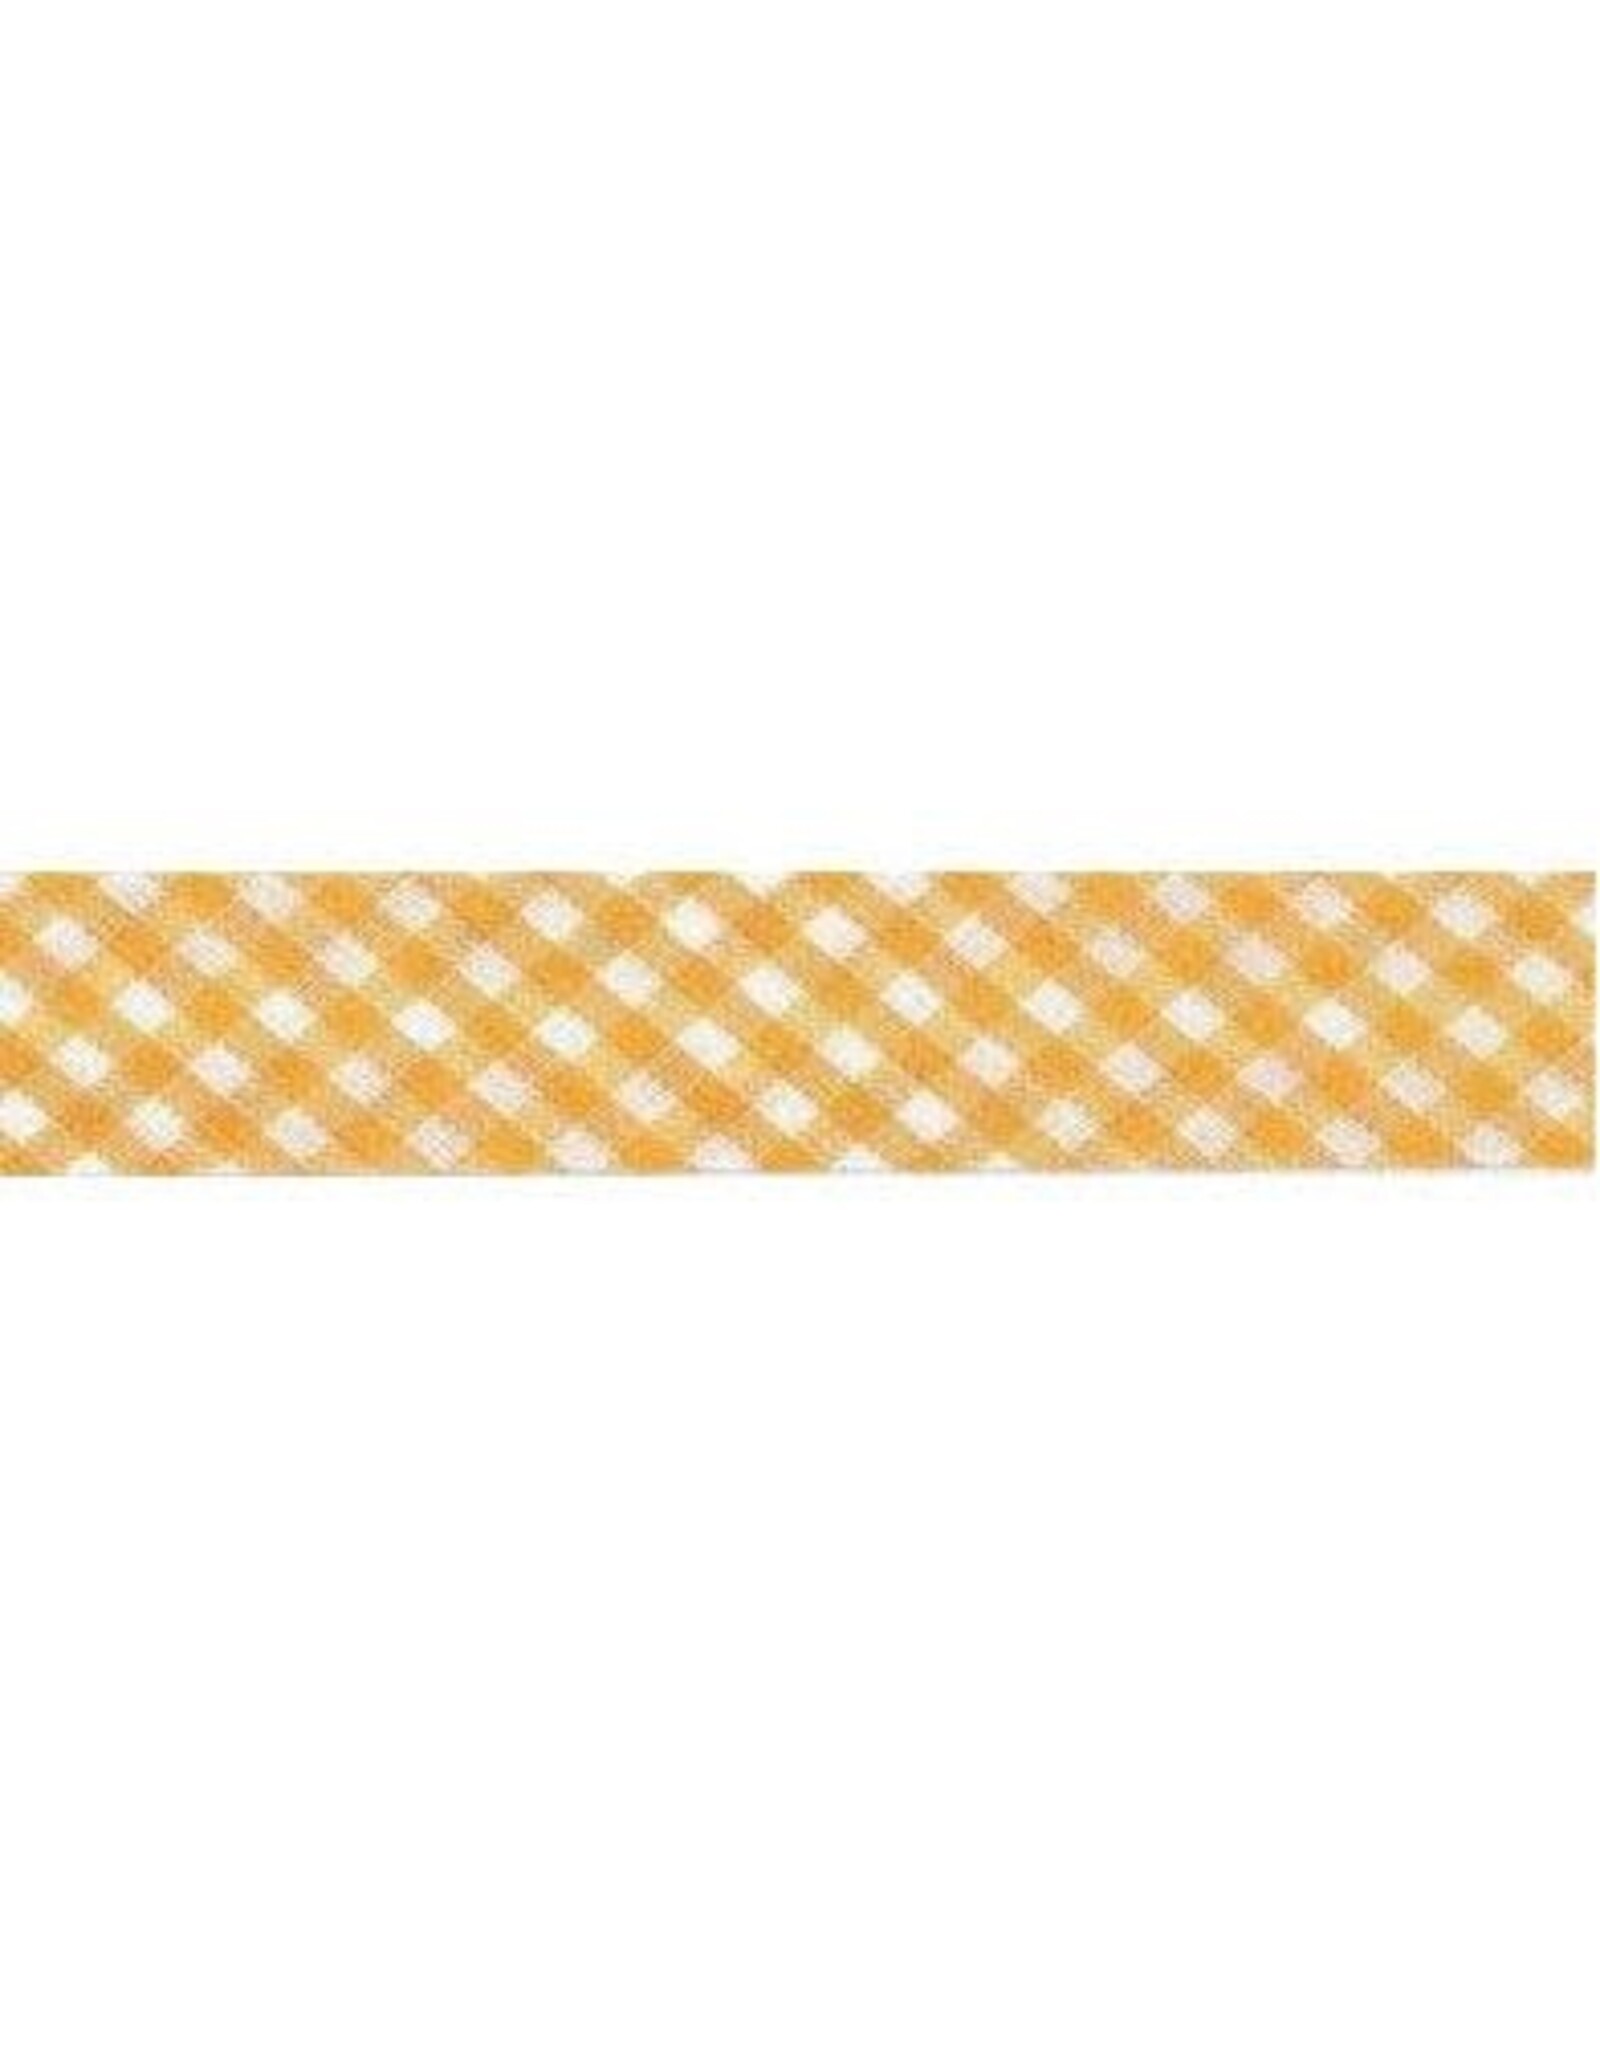 Restyle Bias Tape - 1 meter - checked yellow - 18 mm